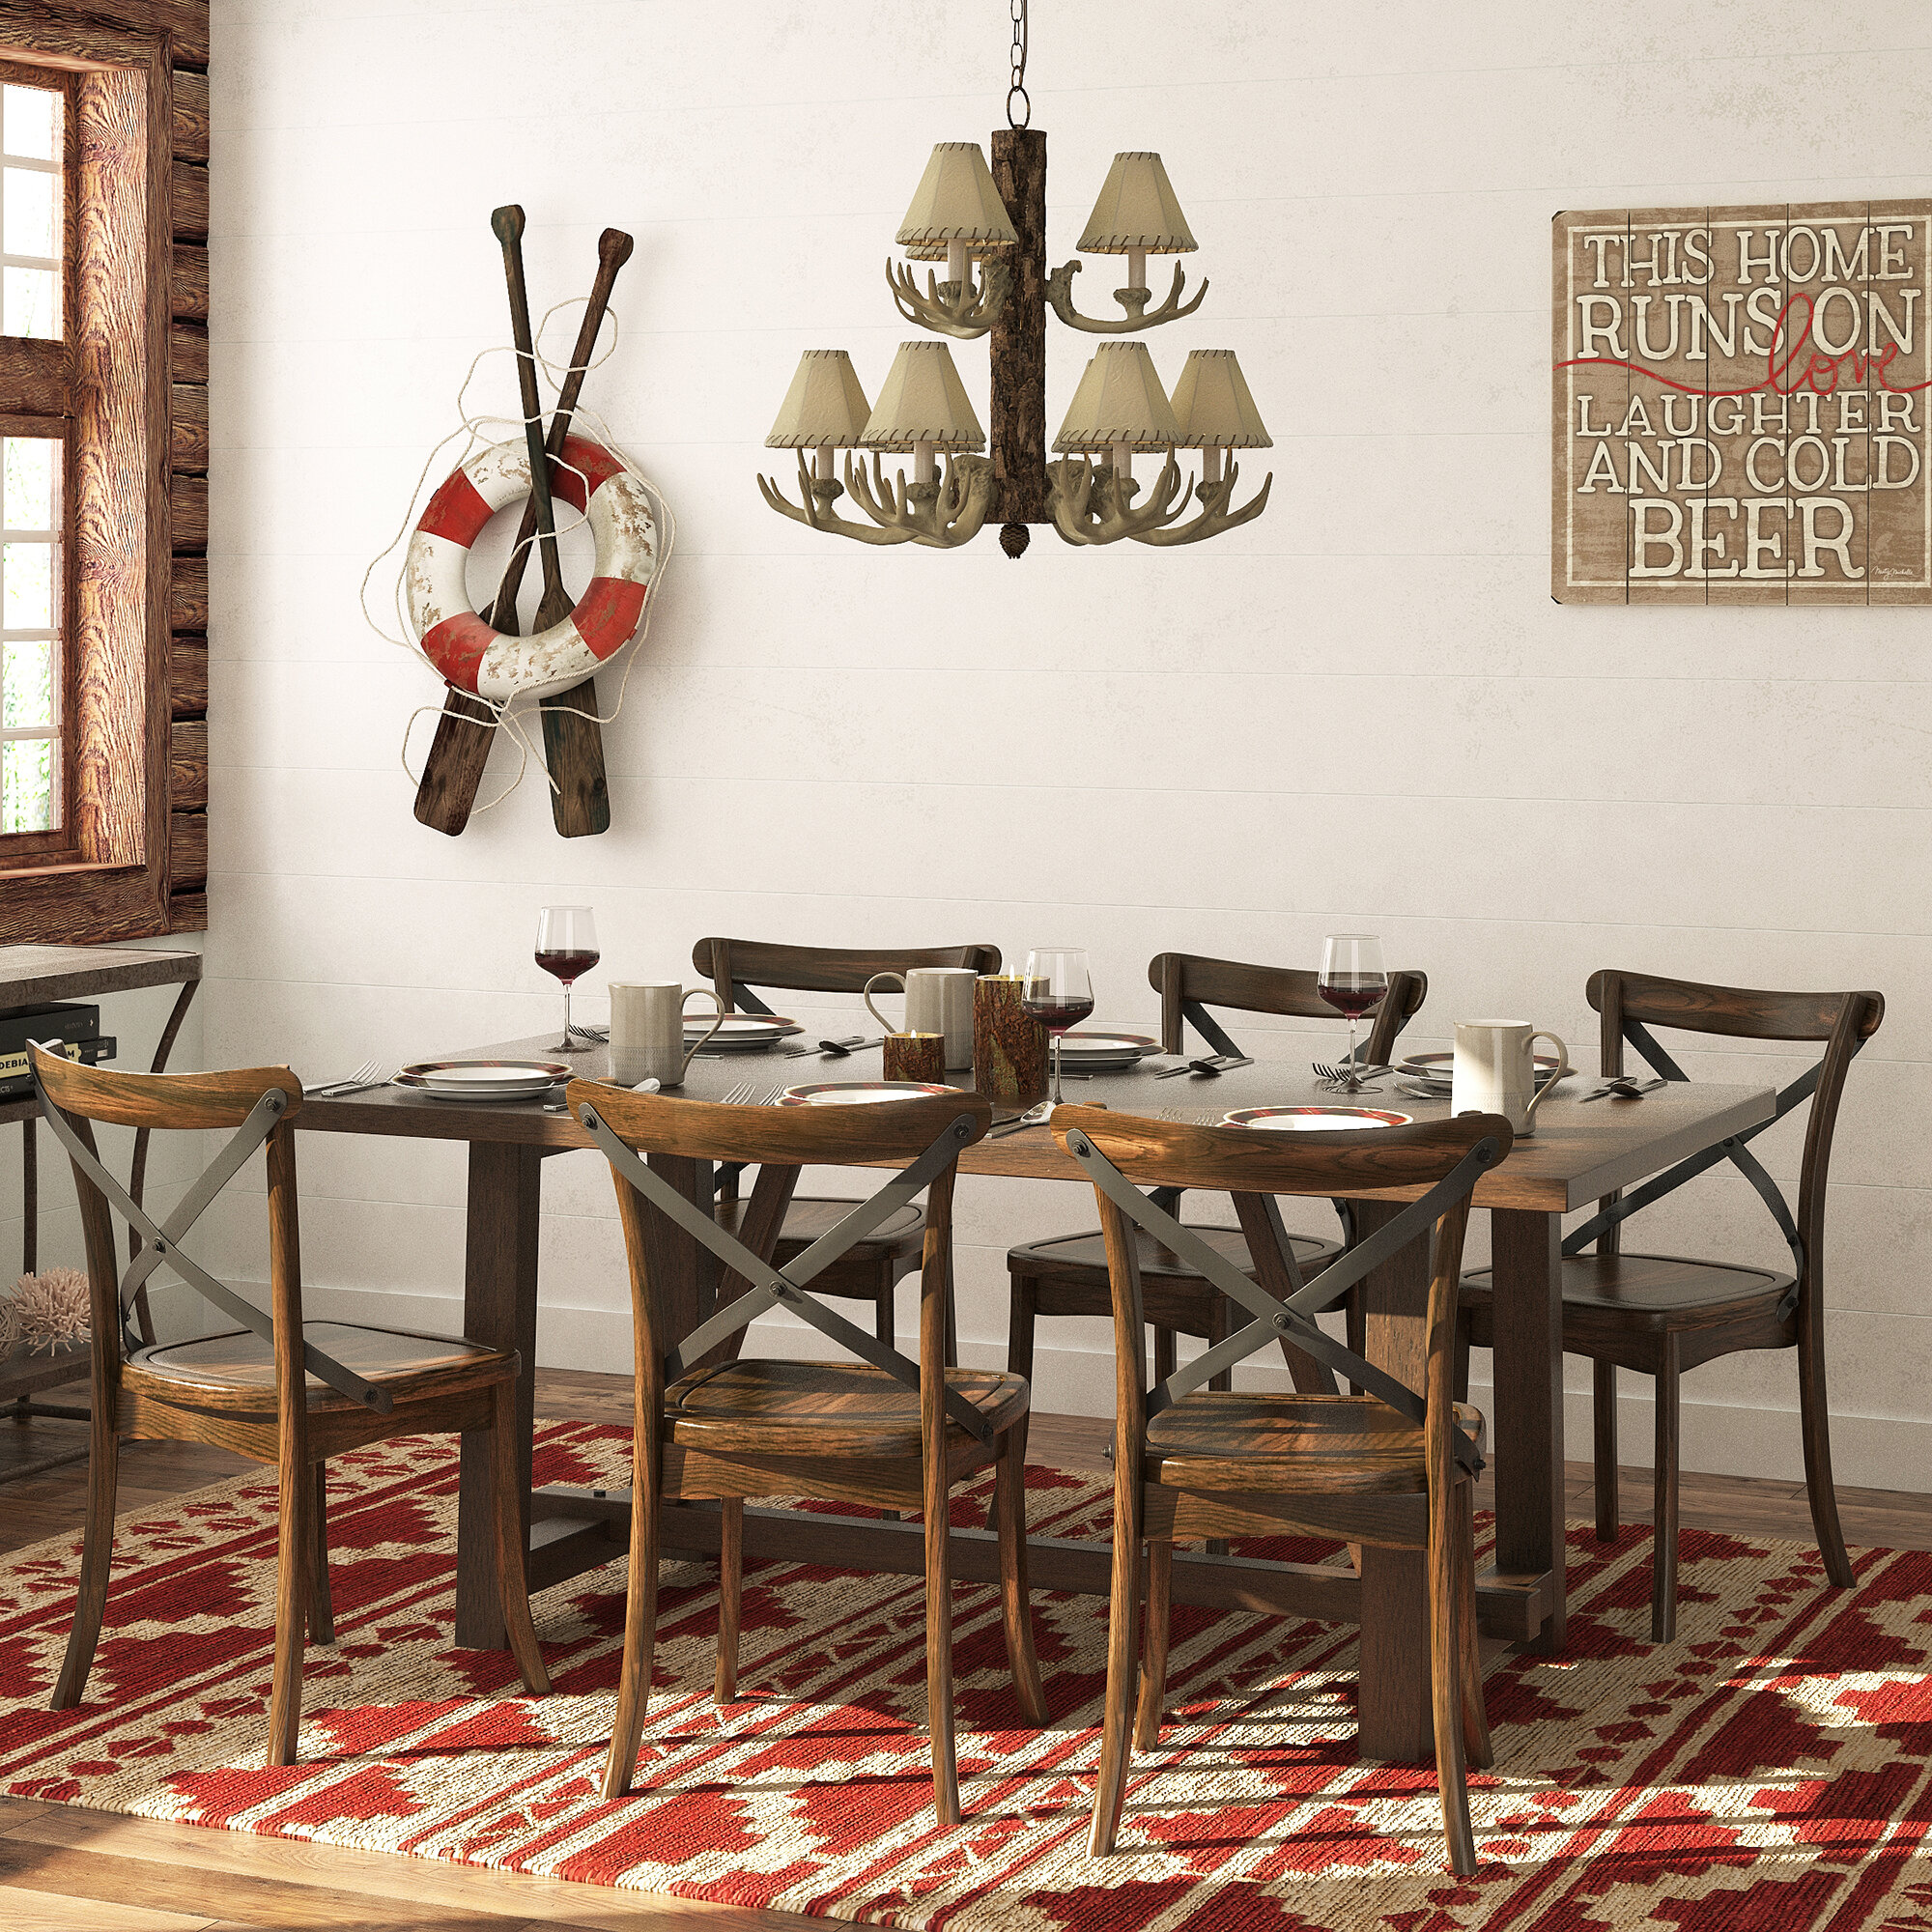 Mhy-Alm Home Collection, Table Cloths